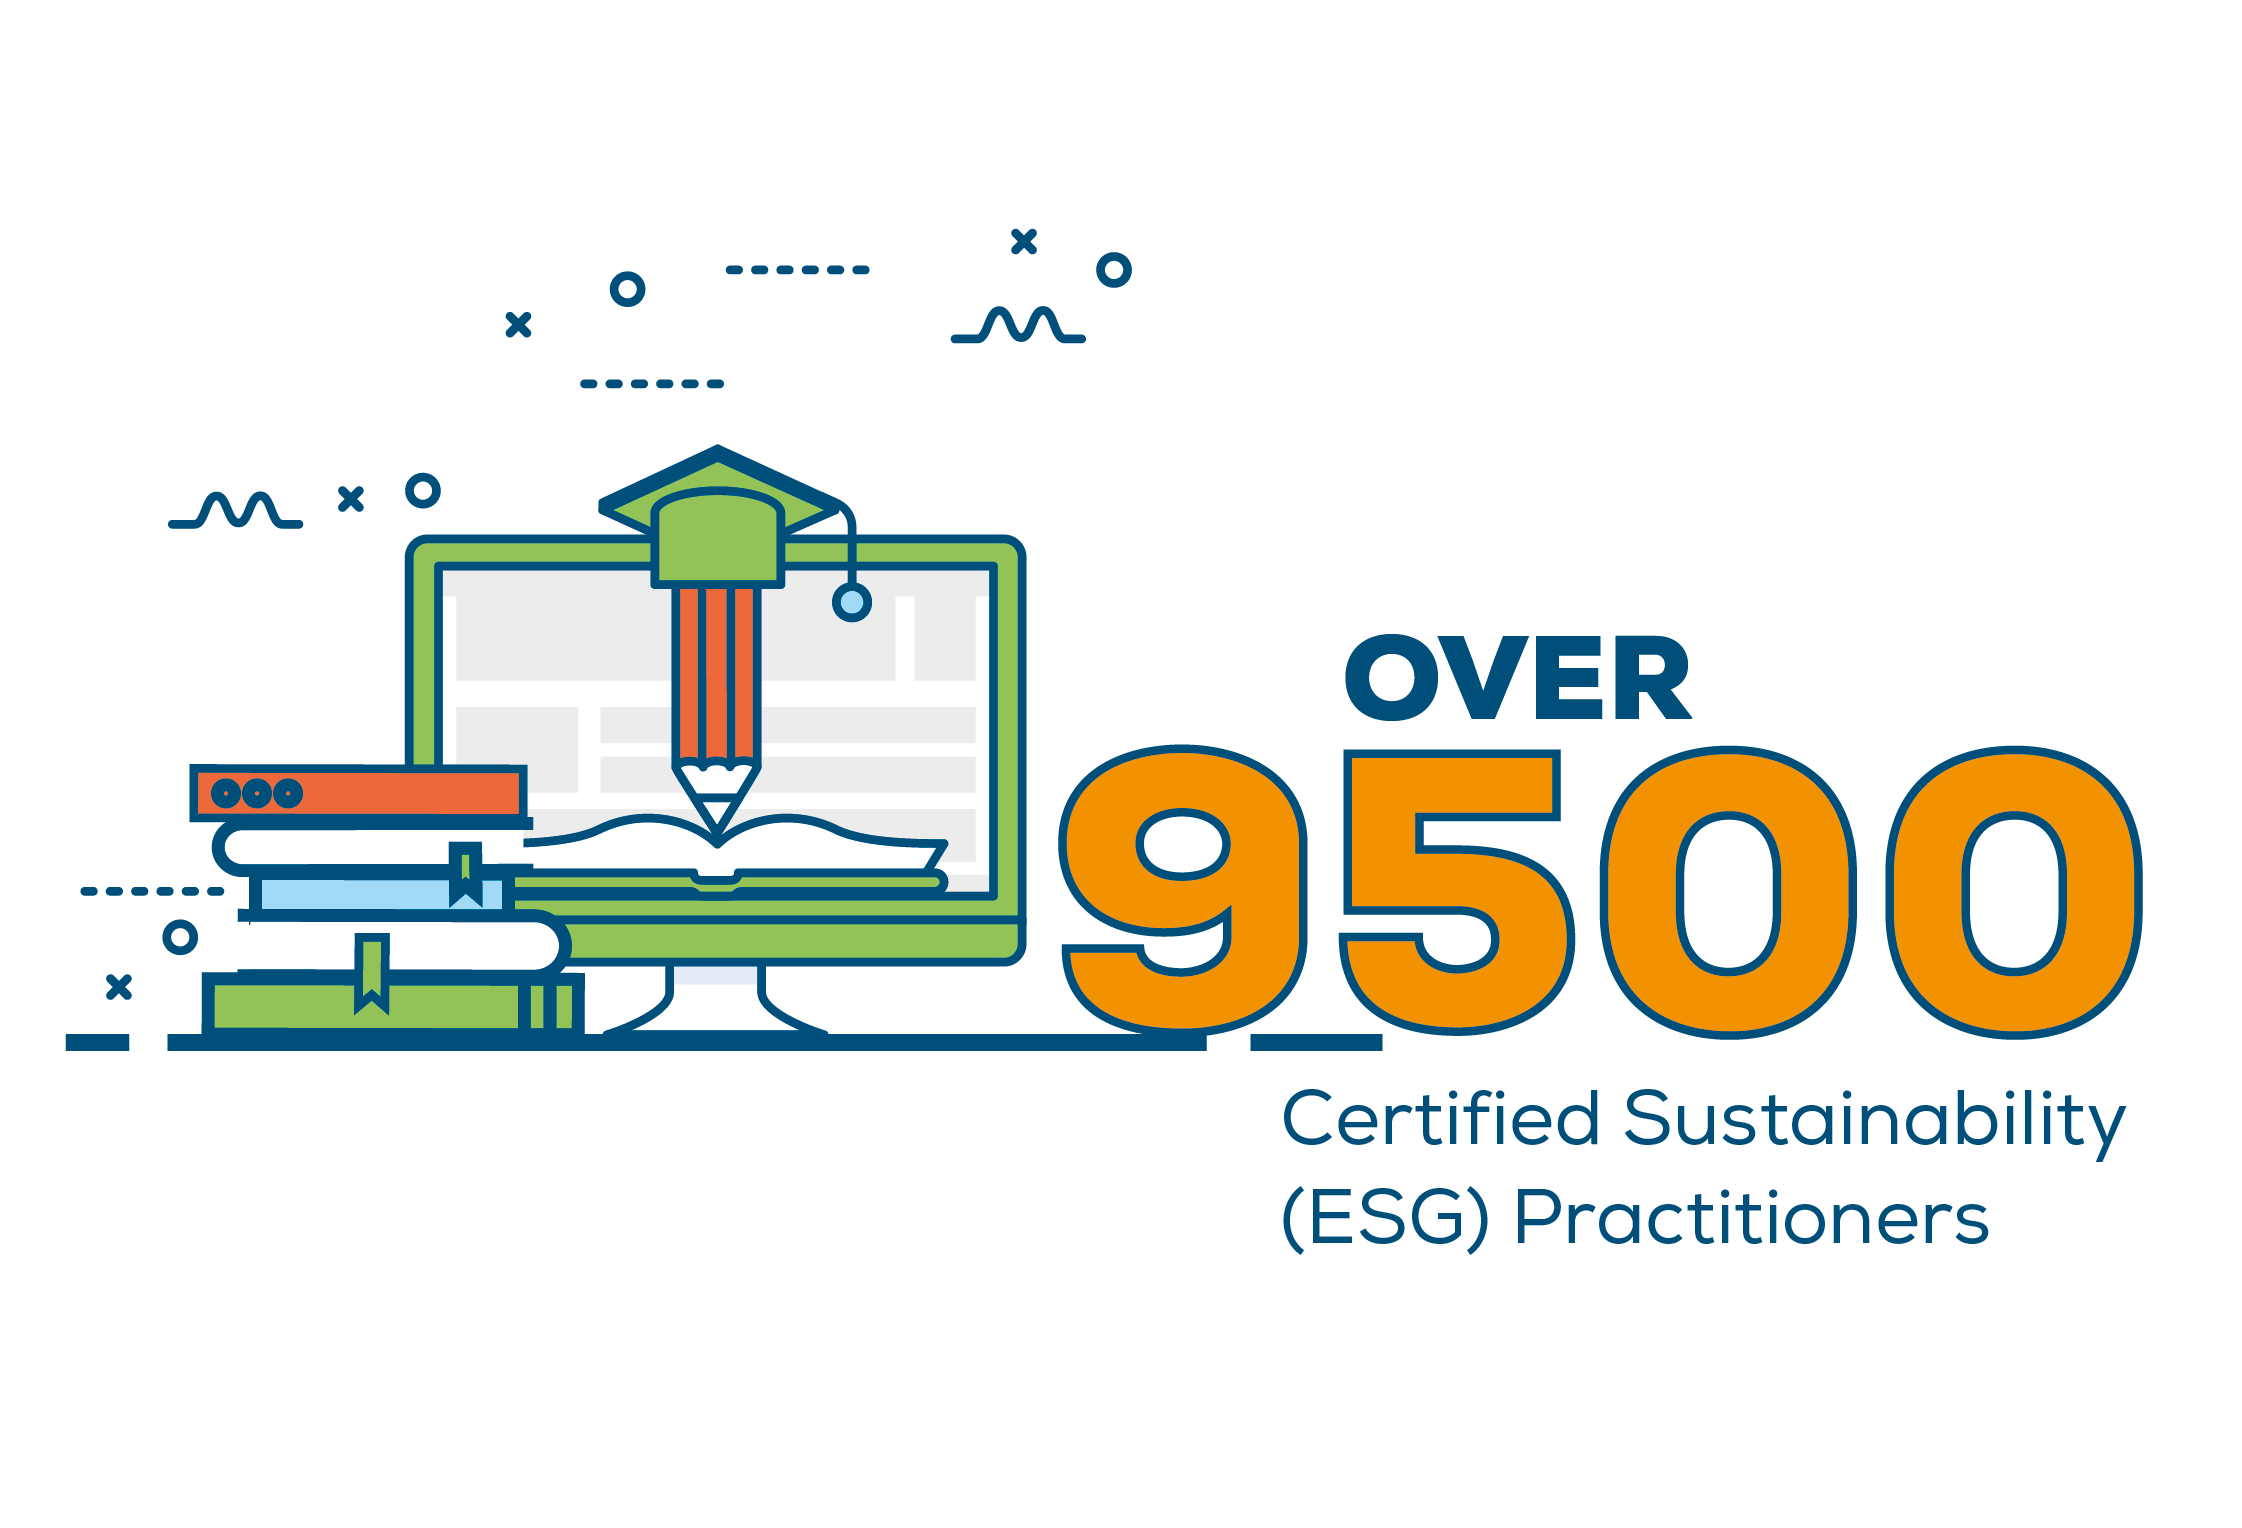 Over 8000 Certified Sustainability ESG Practitioners